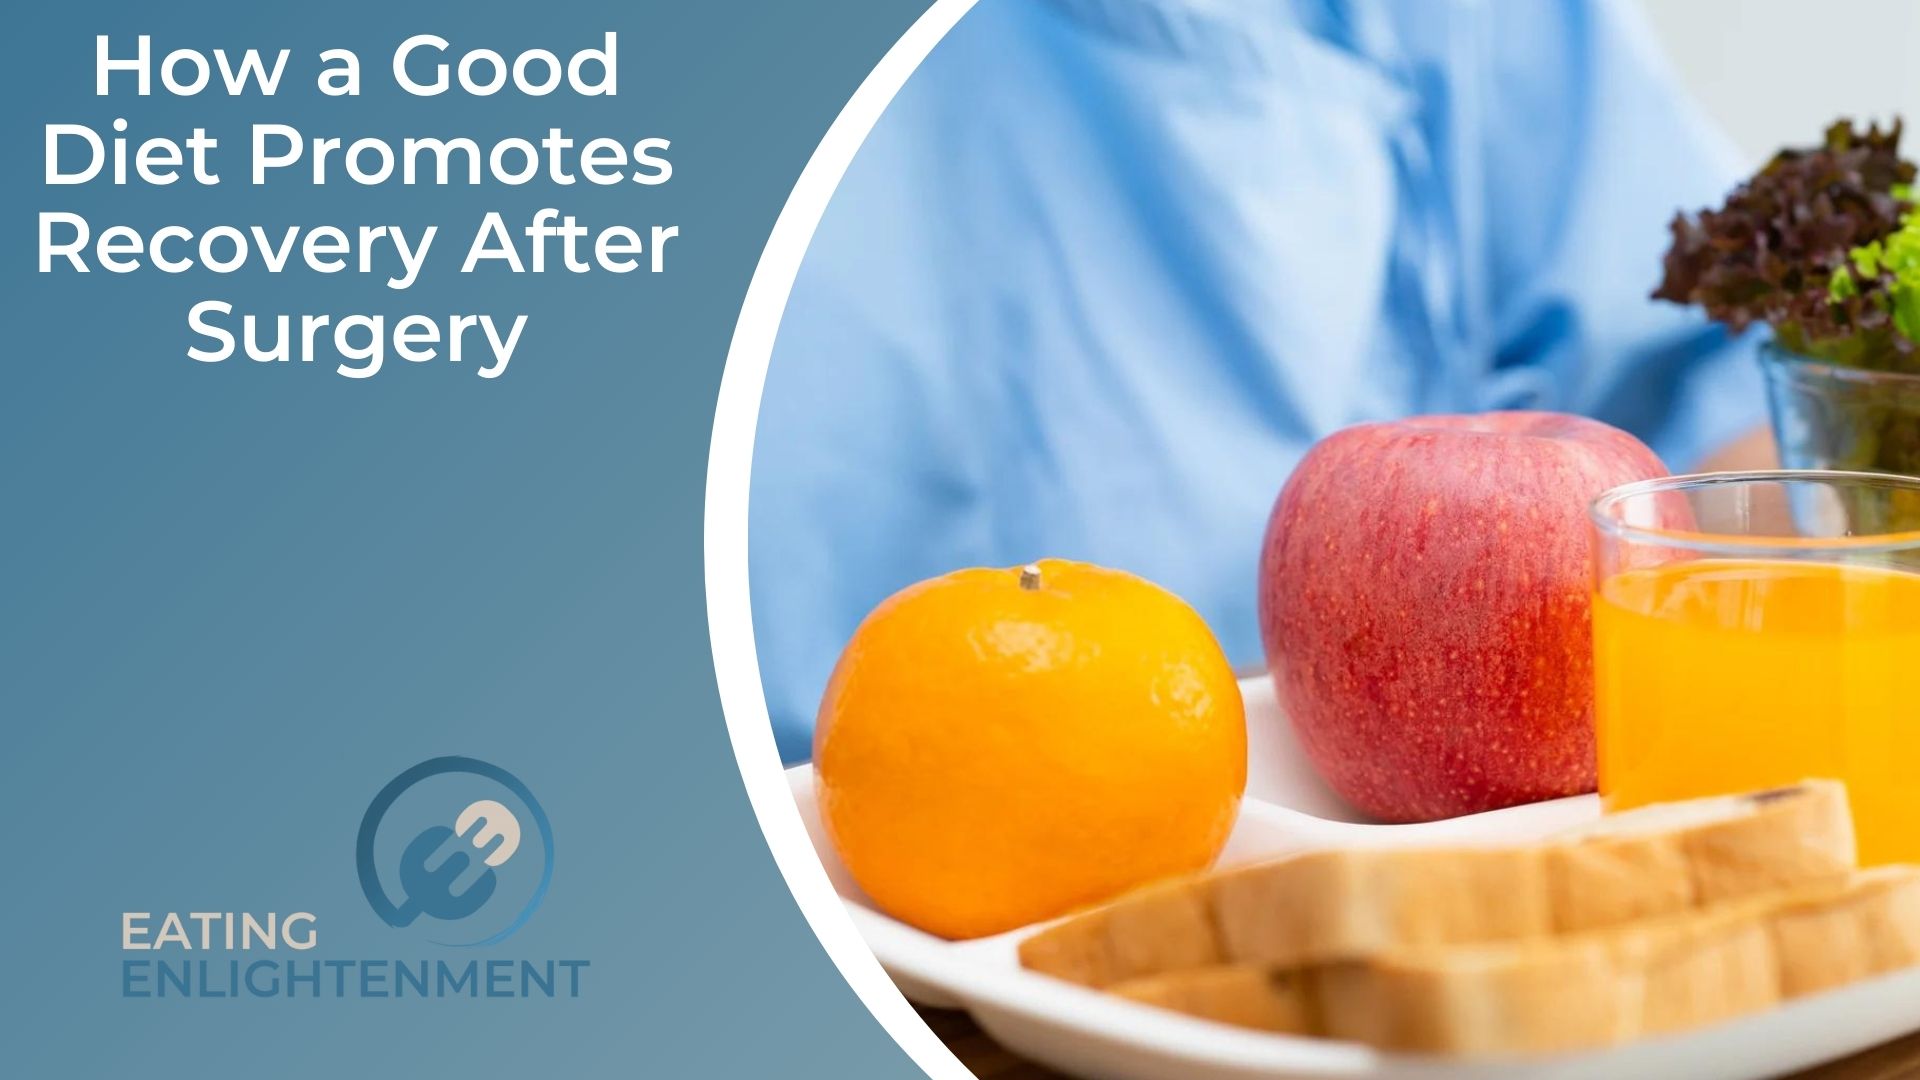 How a Good Diet Promotes Recovery After Surgery